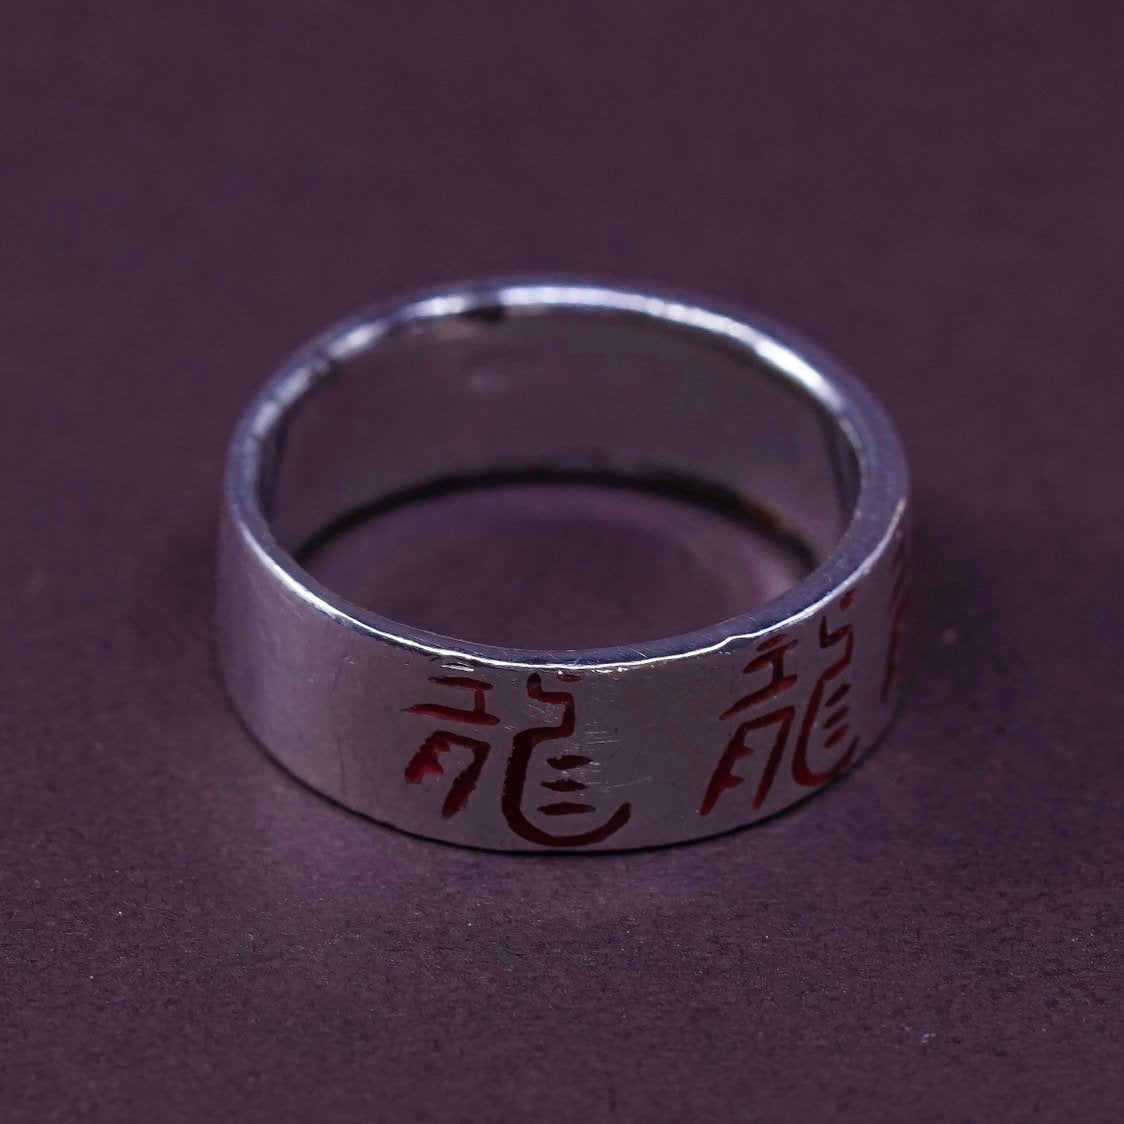 sz 10, vtg Sterling silver ring, 925 wide band w/ Chinese character “dragon”